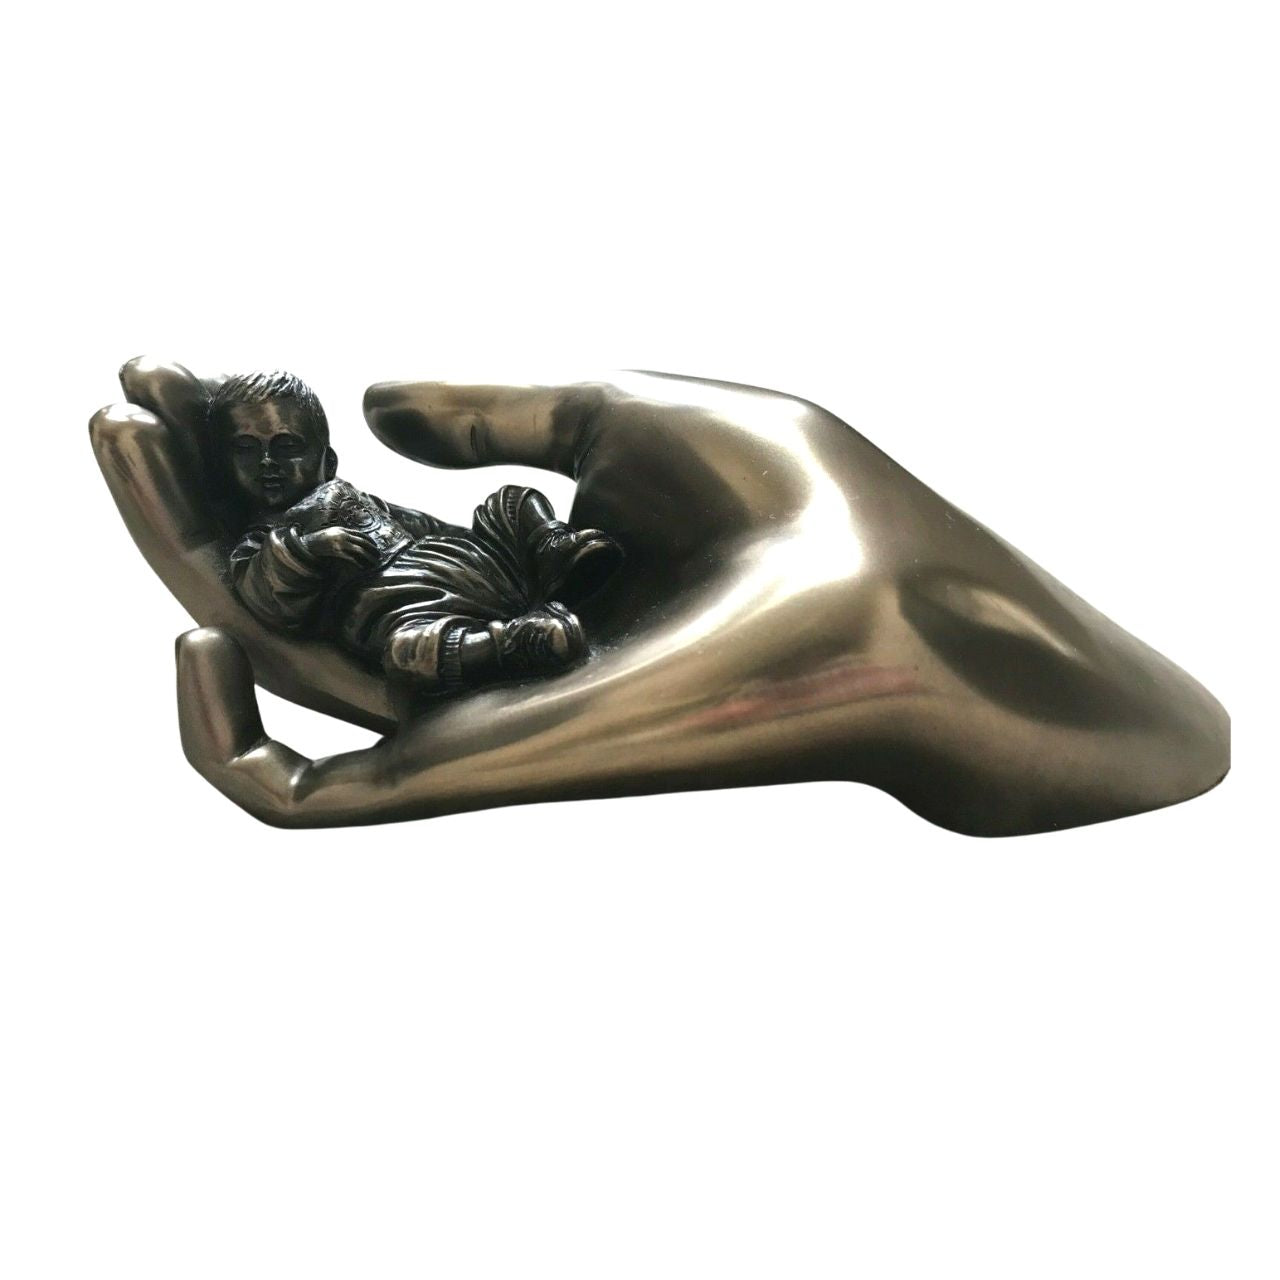 Genesis Caring Baby Boy  Beautifully crafted in cold cast bronze this wonderful baby figurine from the craftsmen of Genesis Fine Arts depicts the sleeping baby boy carefully curled up in a mothers caring hand.  Caring Baby Boy, birth or christening gift.